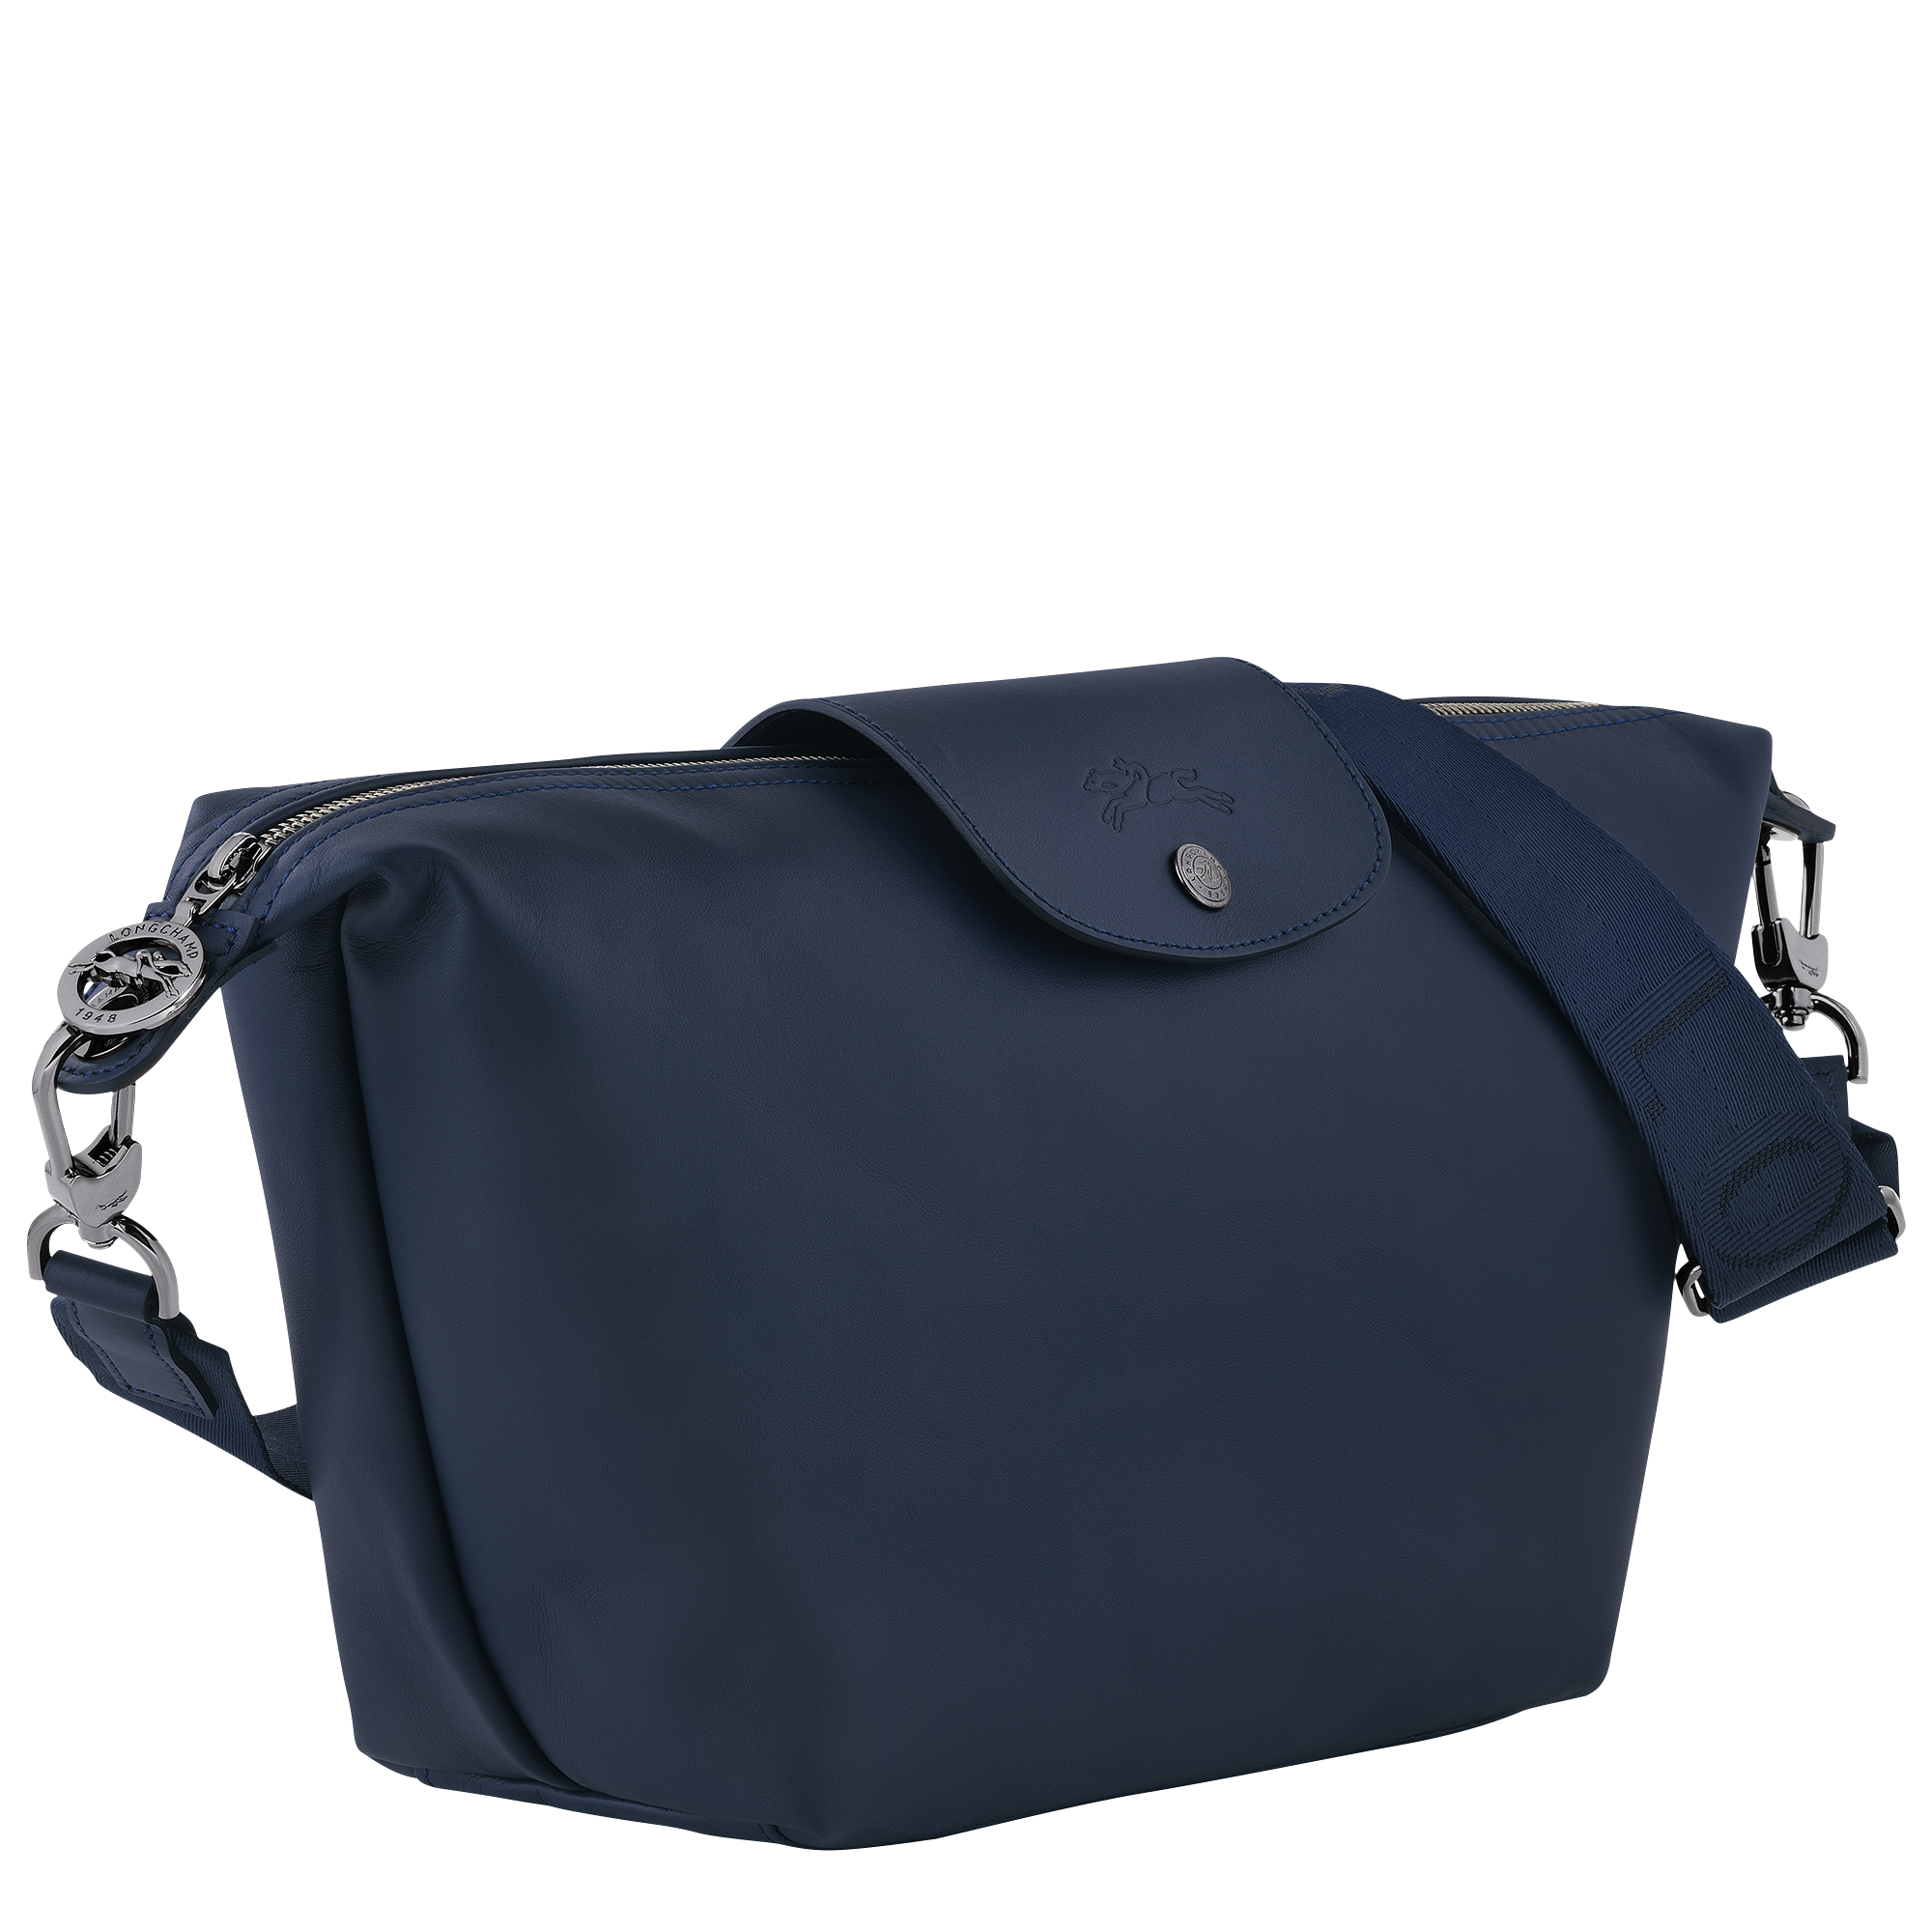 Le Pliage Xtra S Hobo bag Navy - Leather (10210987556)